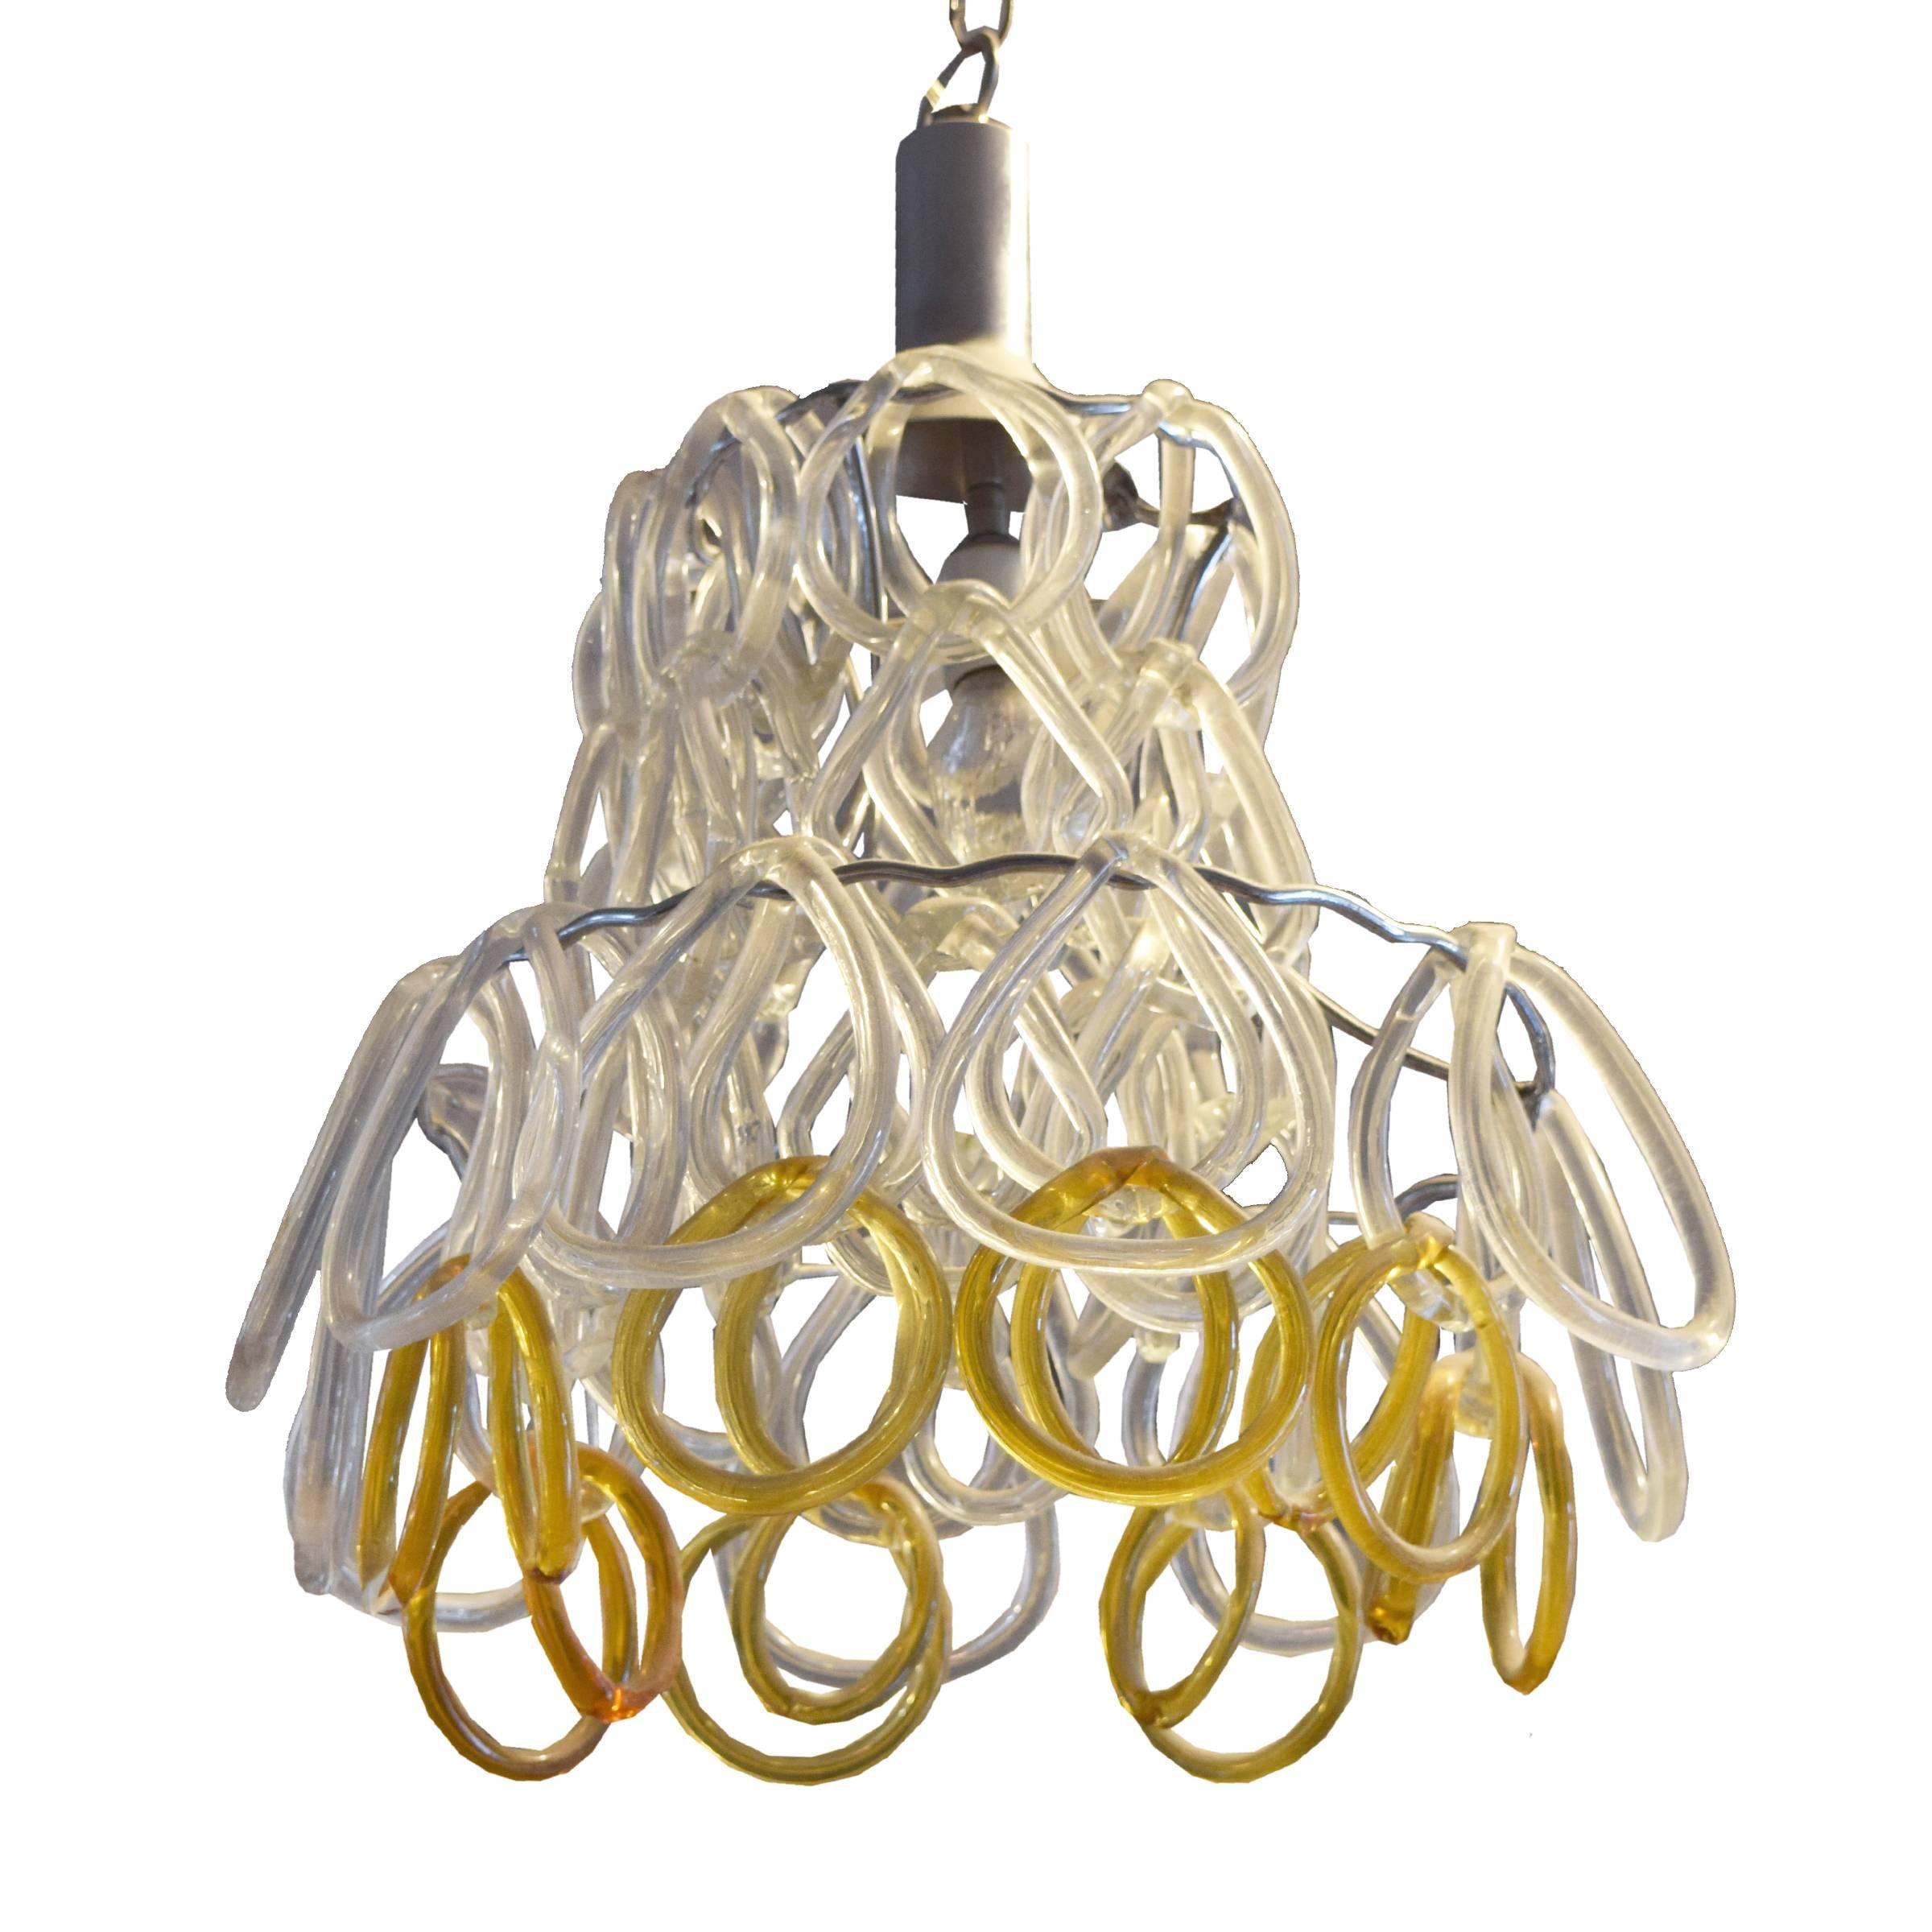 A funky Italian Mid-Century light fixture with four tiers of interlocking slumped glass rings.
Height listed does not include chain.